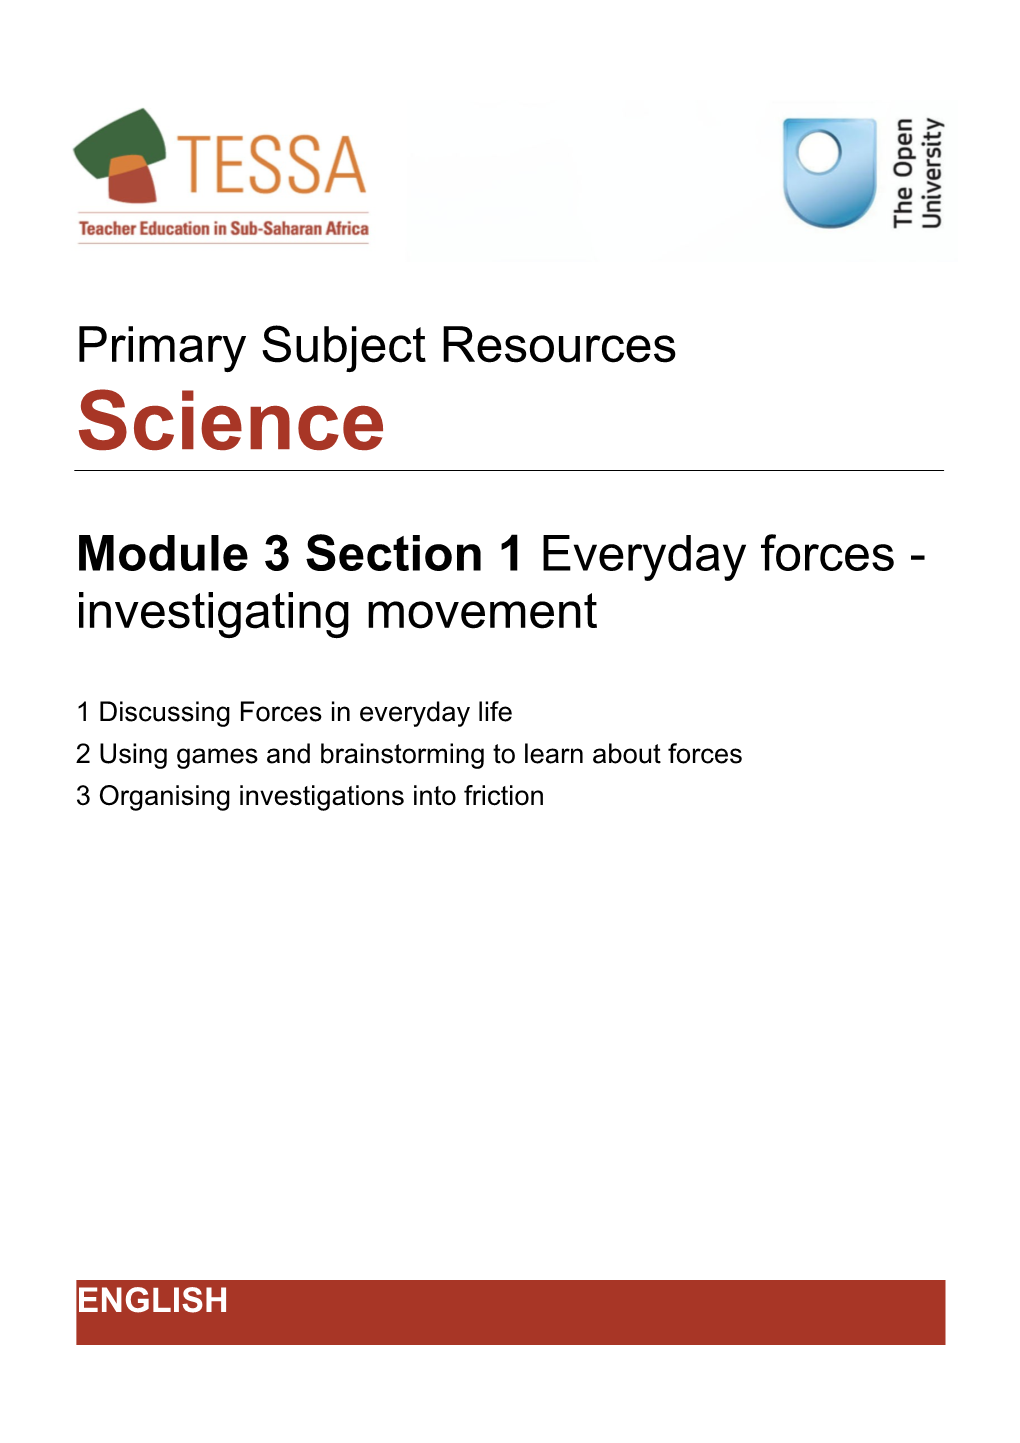 Section 1 : Everyday Forces - Investigating Movement